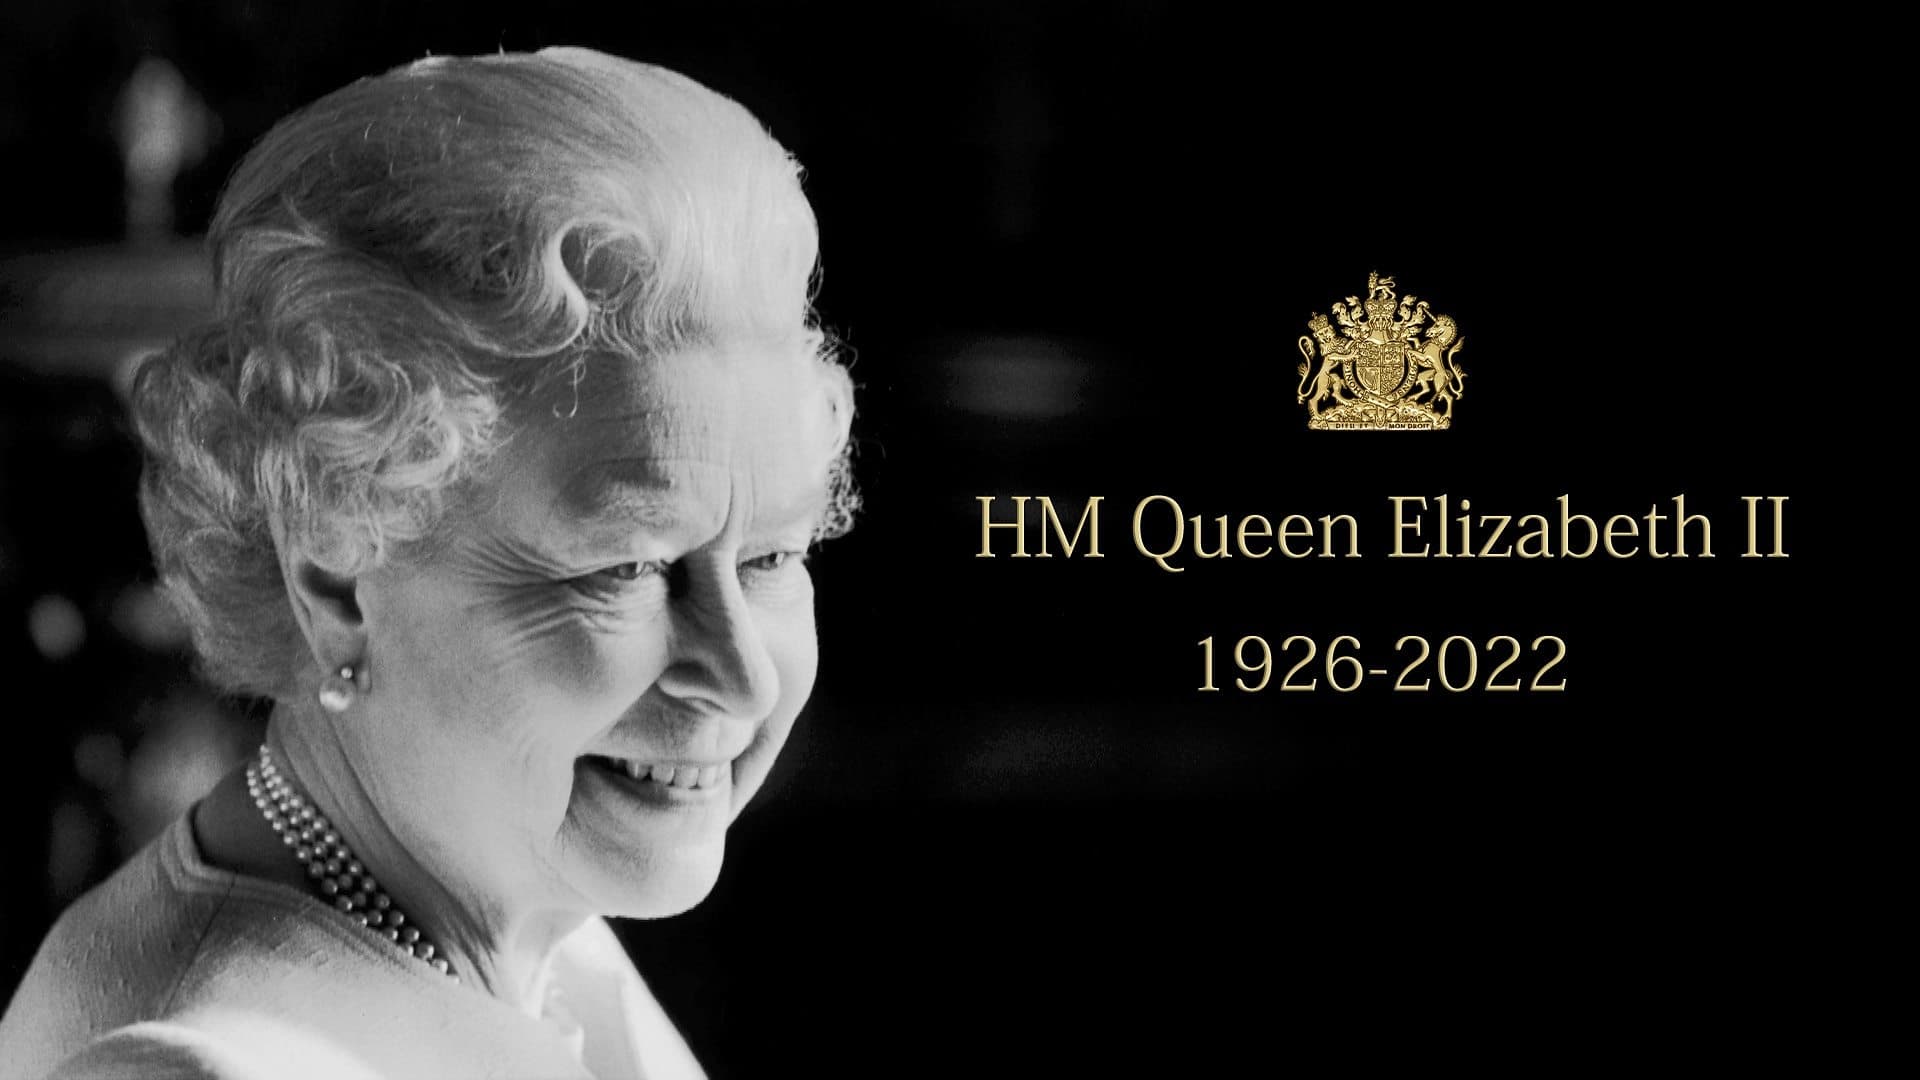 Xem Phim Tưởng Nhớ Nữ Hoàng Elizabeth II (A Tribute to Her Majesty the Queen)